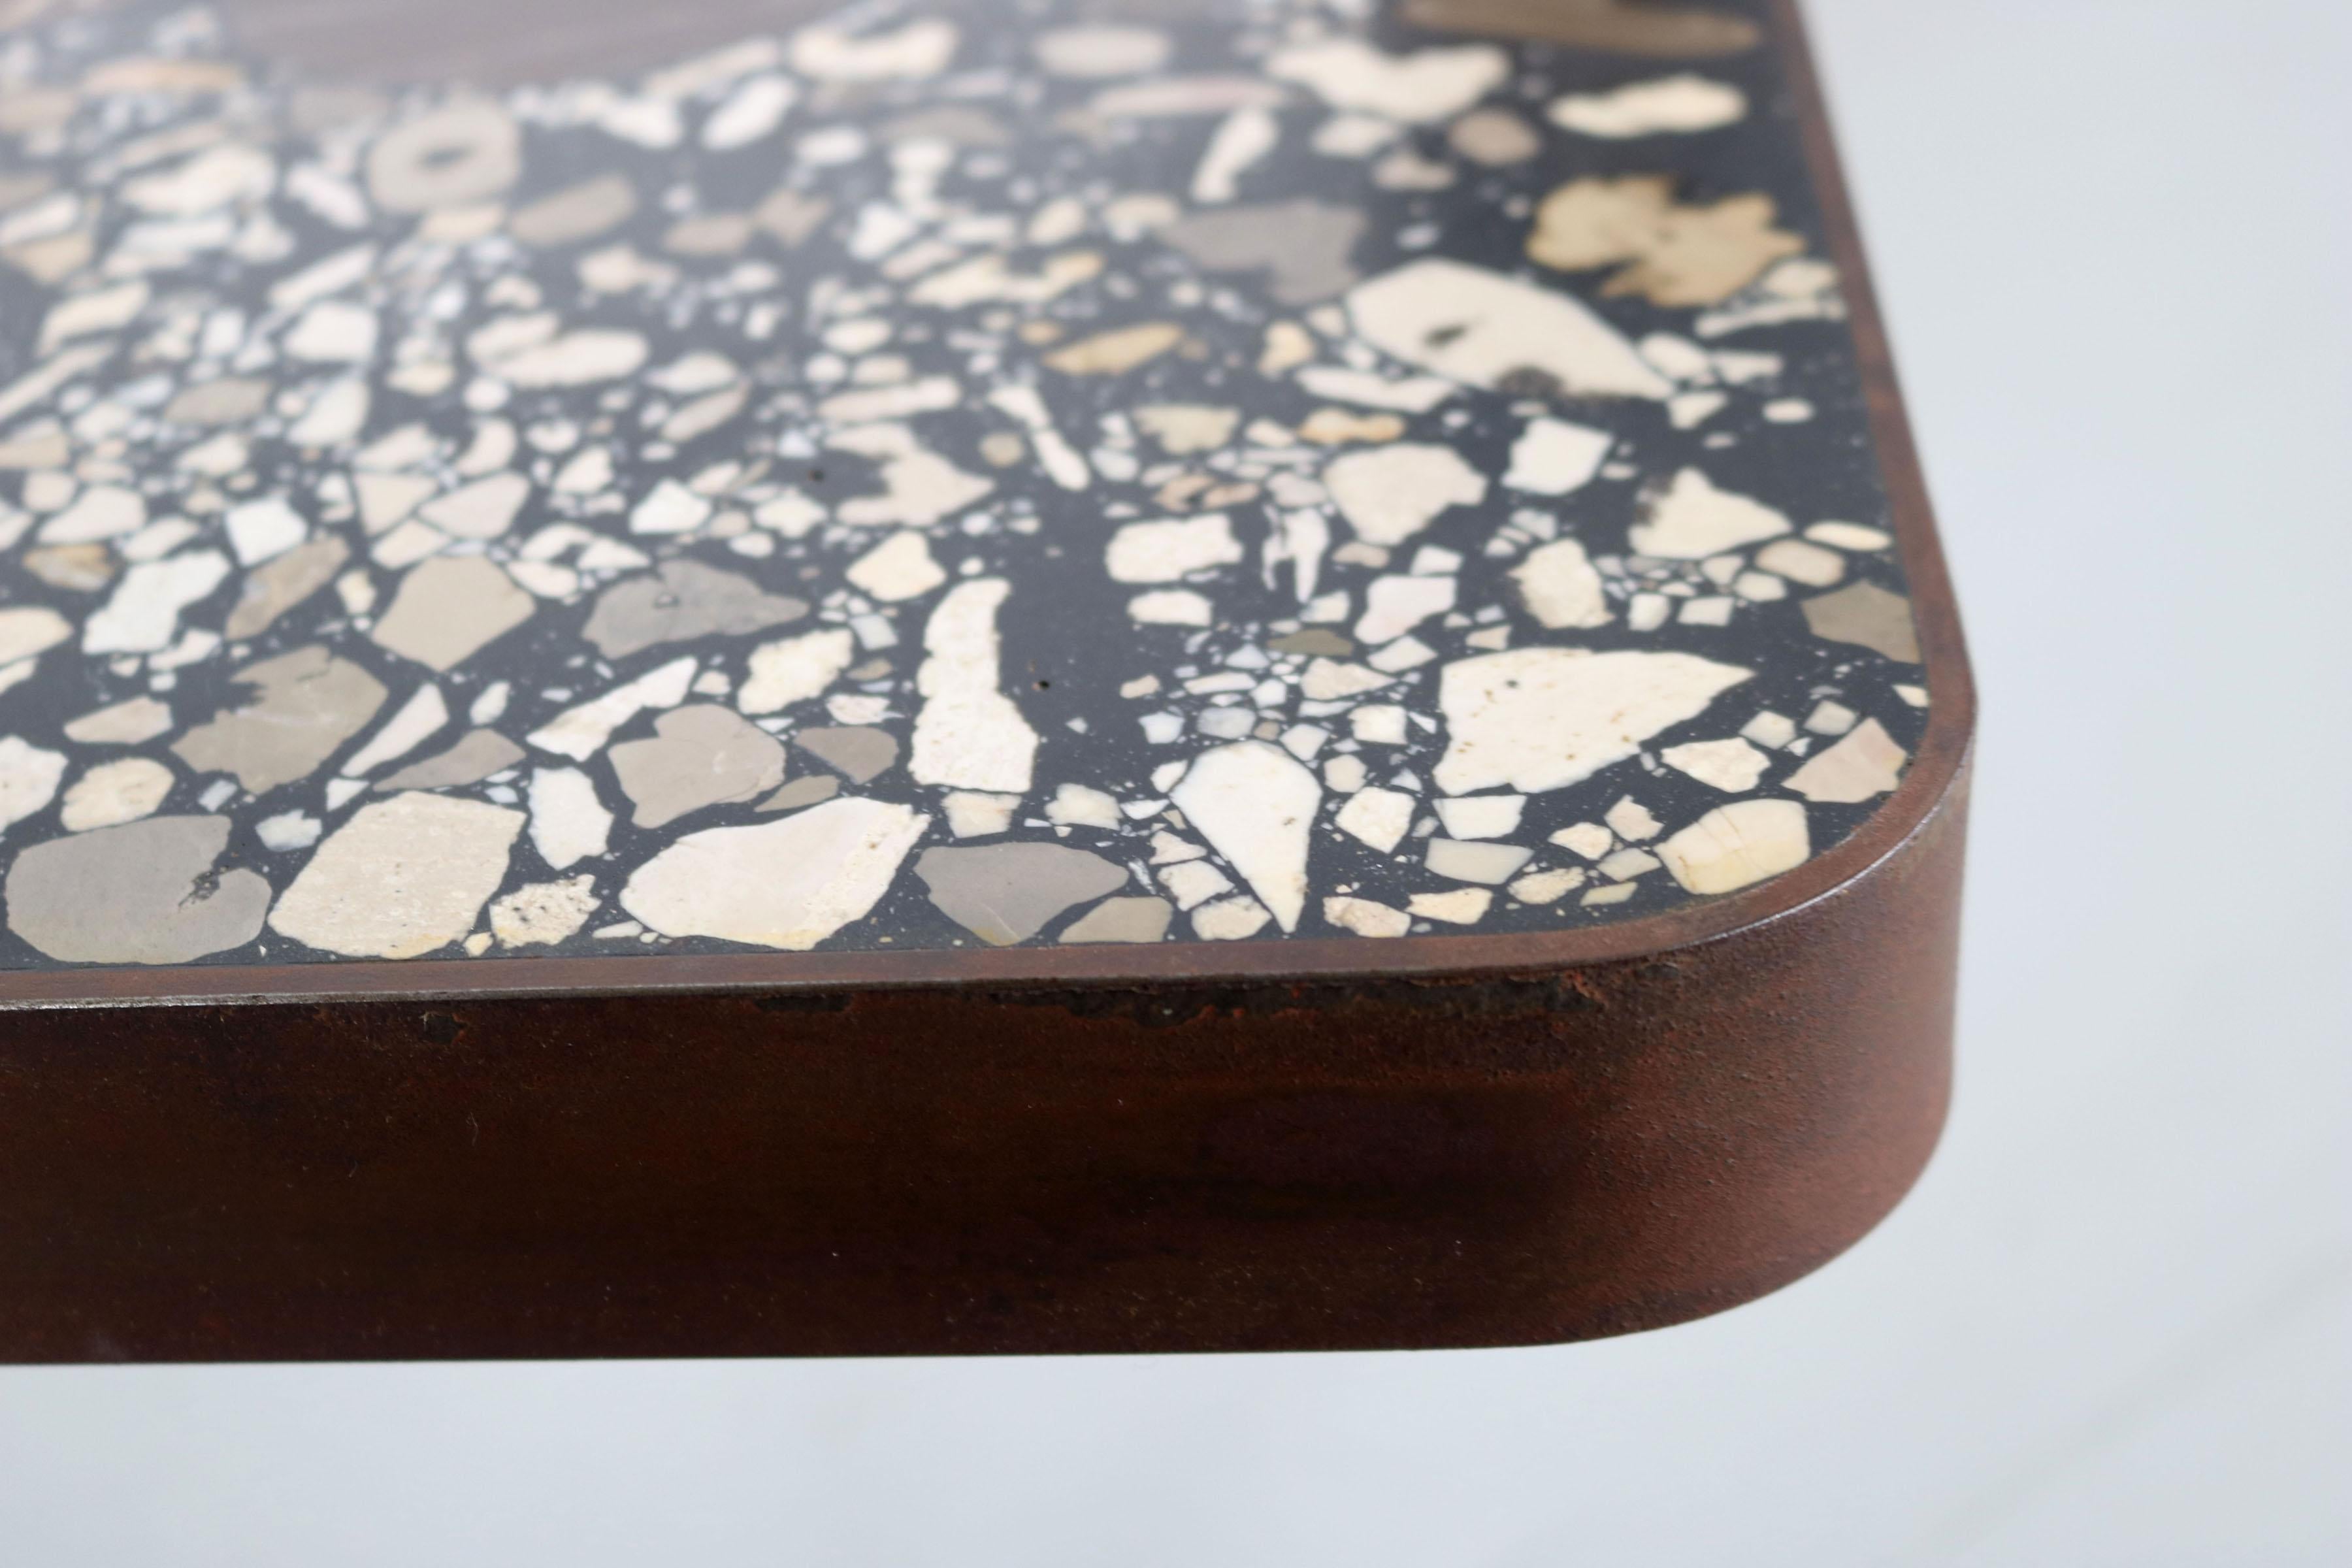 Felix Muhrhofer Contemporary Terrazzo Table with Corroded Steel Construction 5